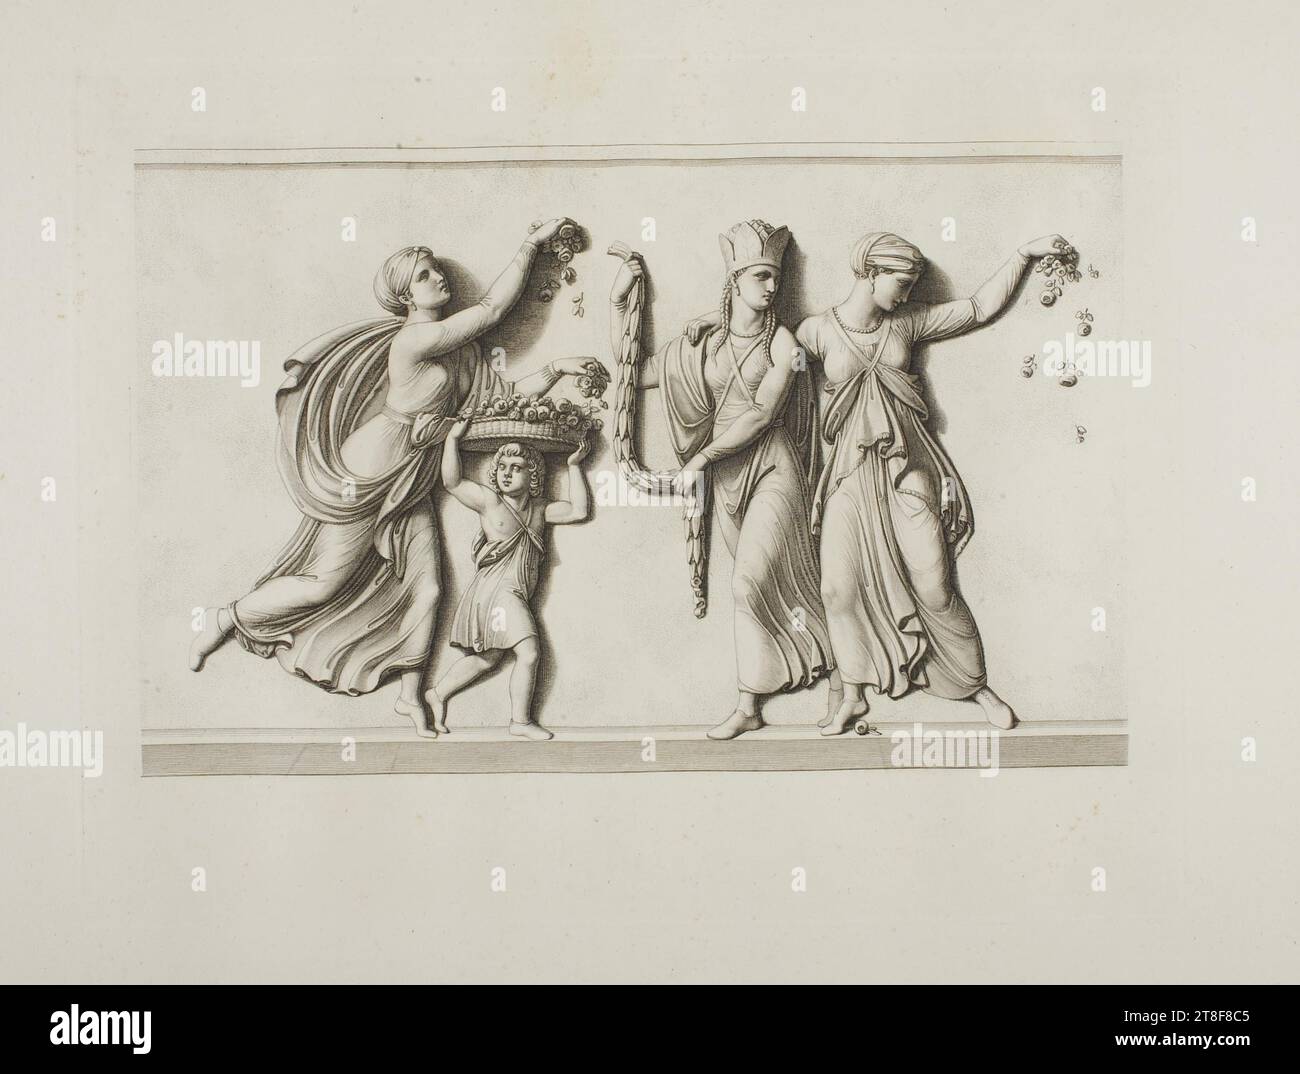 Dancing Persian Women, Samuel Amsler, 1835, Graphic Art, Copper Engraving, Paper, Color, Printer's ink, Copper engraving, Printet, Height (plate size?) 224 mm, Width (plate size?) 293 mm, Graphic Design, European, Modernity (1800 - 1914 Stock Photo